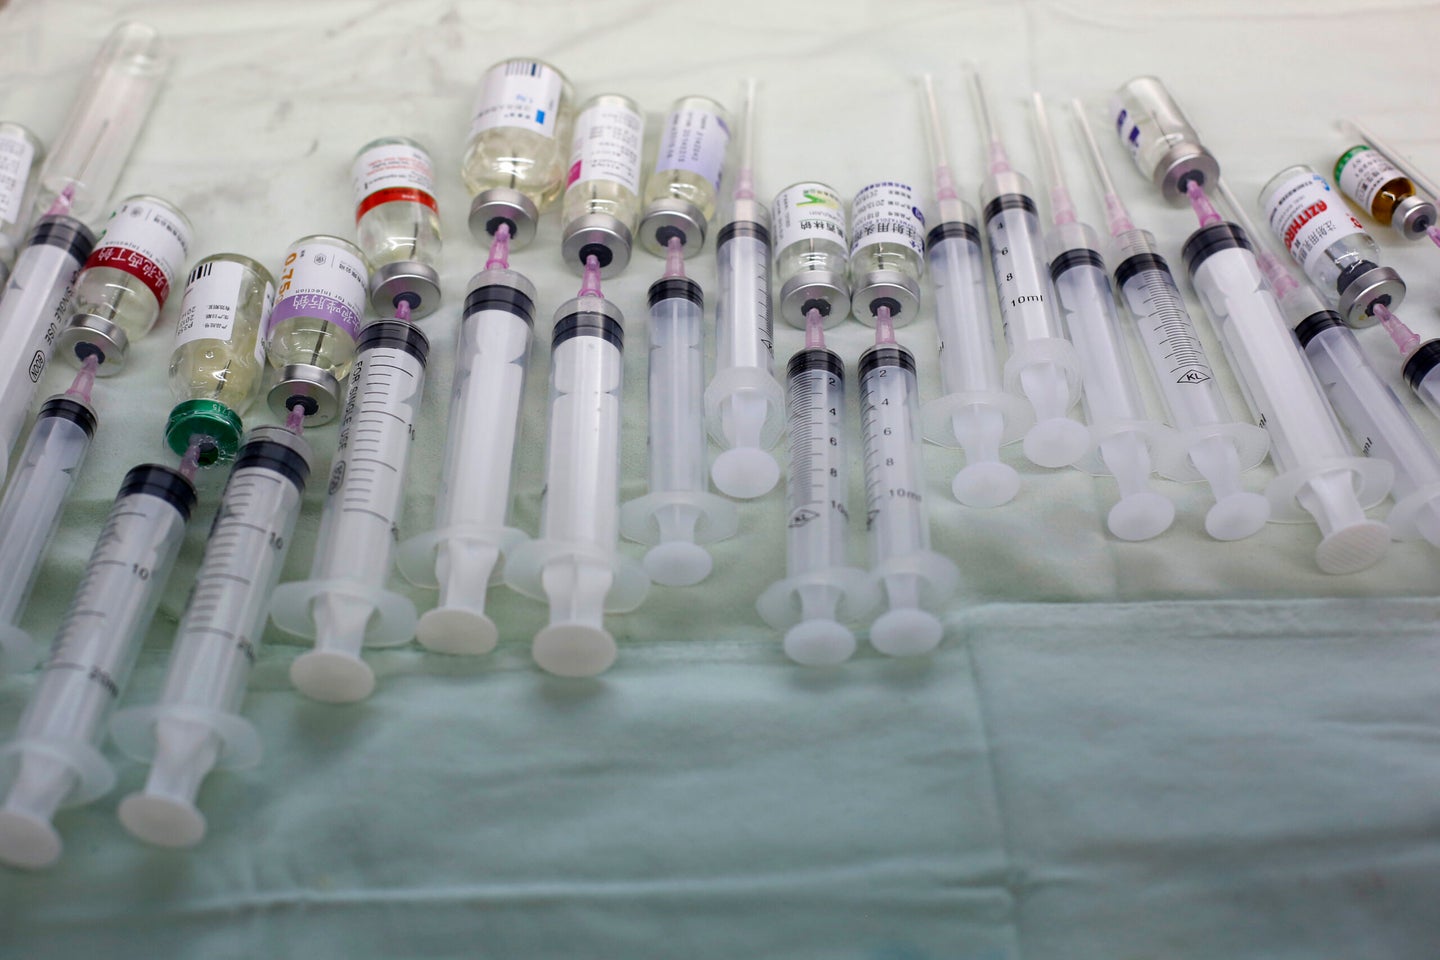 Injectable drugs are pictured inside an injection room at a hospital in Shanghai May 4, 2014. Picture taken May 4, 2014. REUTERS/Aly Song (CHINA - Tags: HEALTH BUSINESS) - RTR3QT2Q